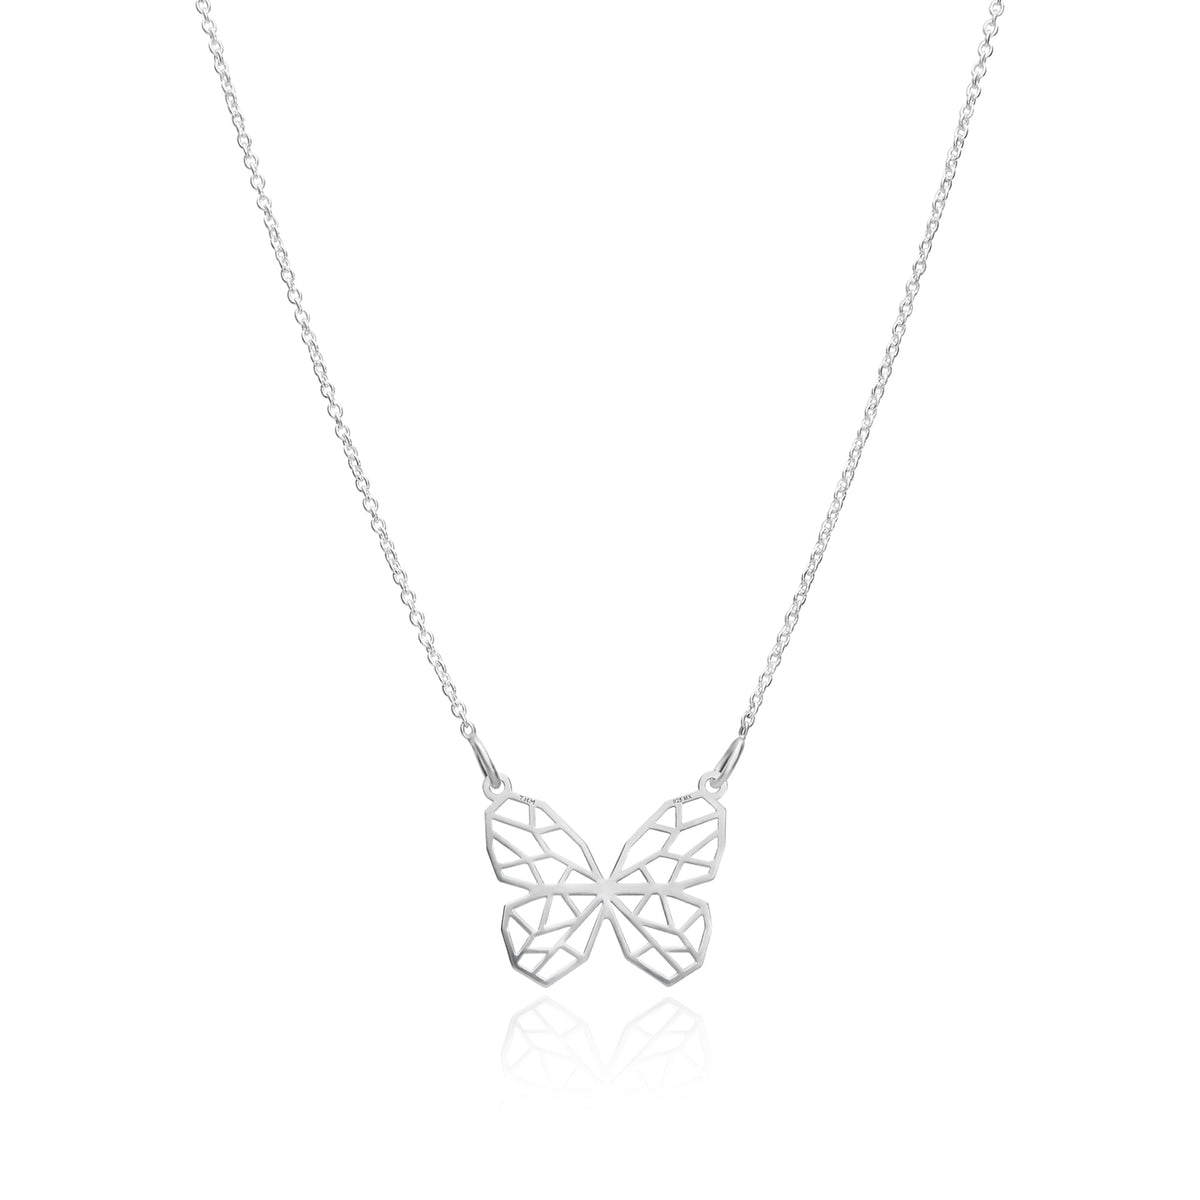 Pendant 925 Silver Women Origami Butterfly Anamora by Tanya Moss